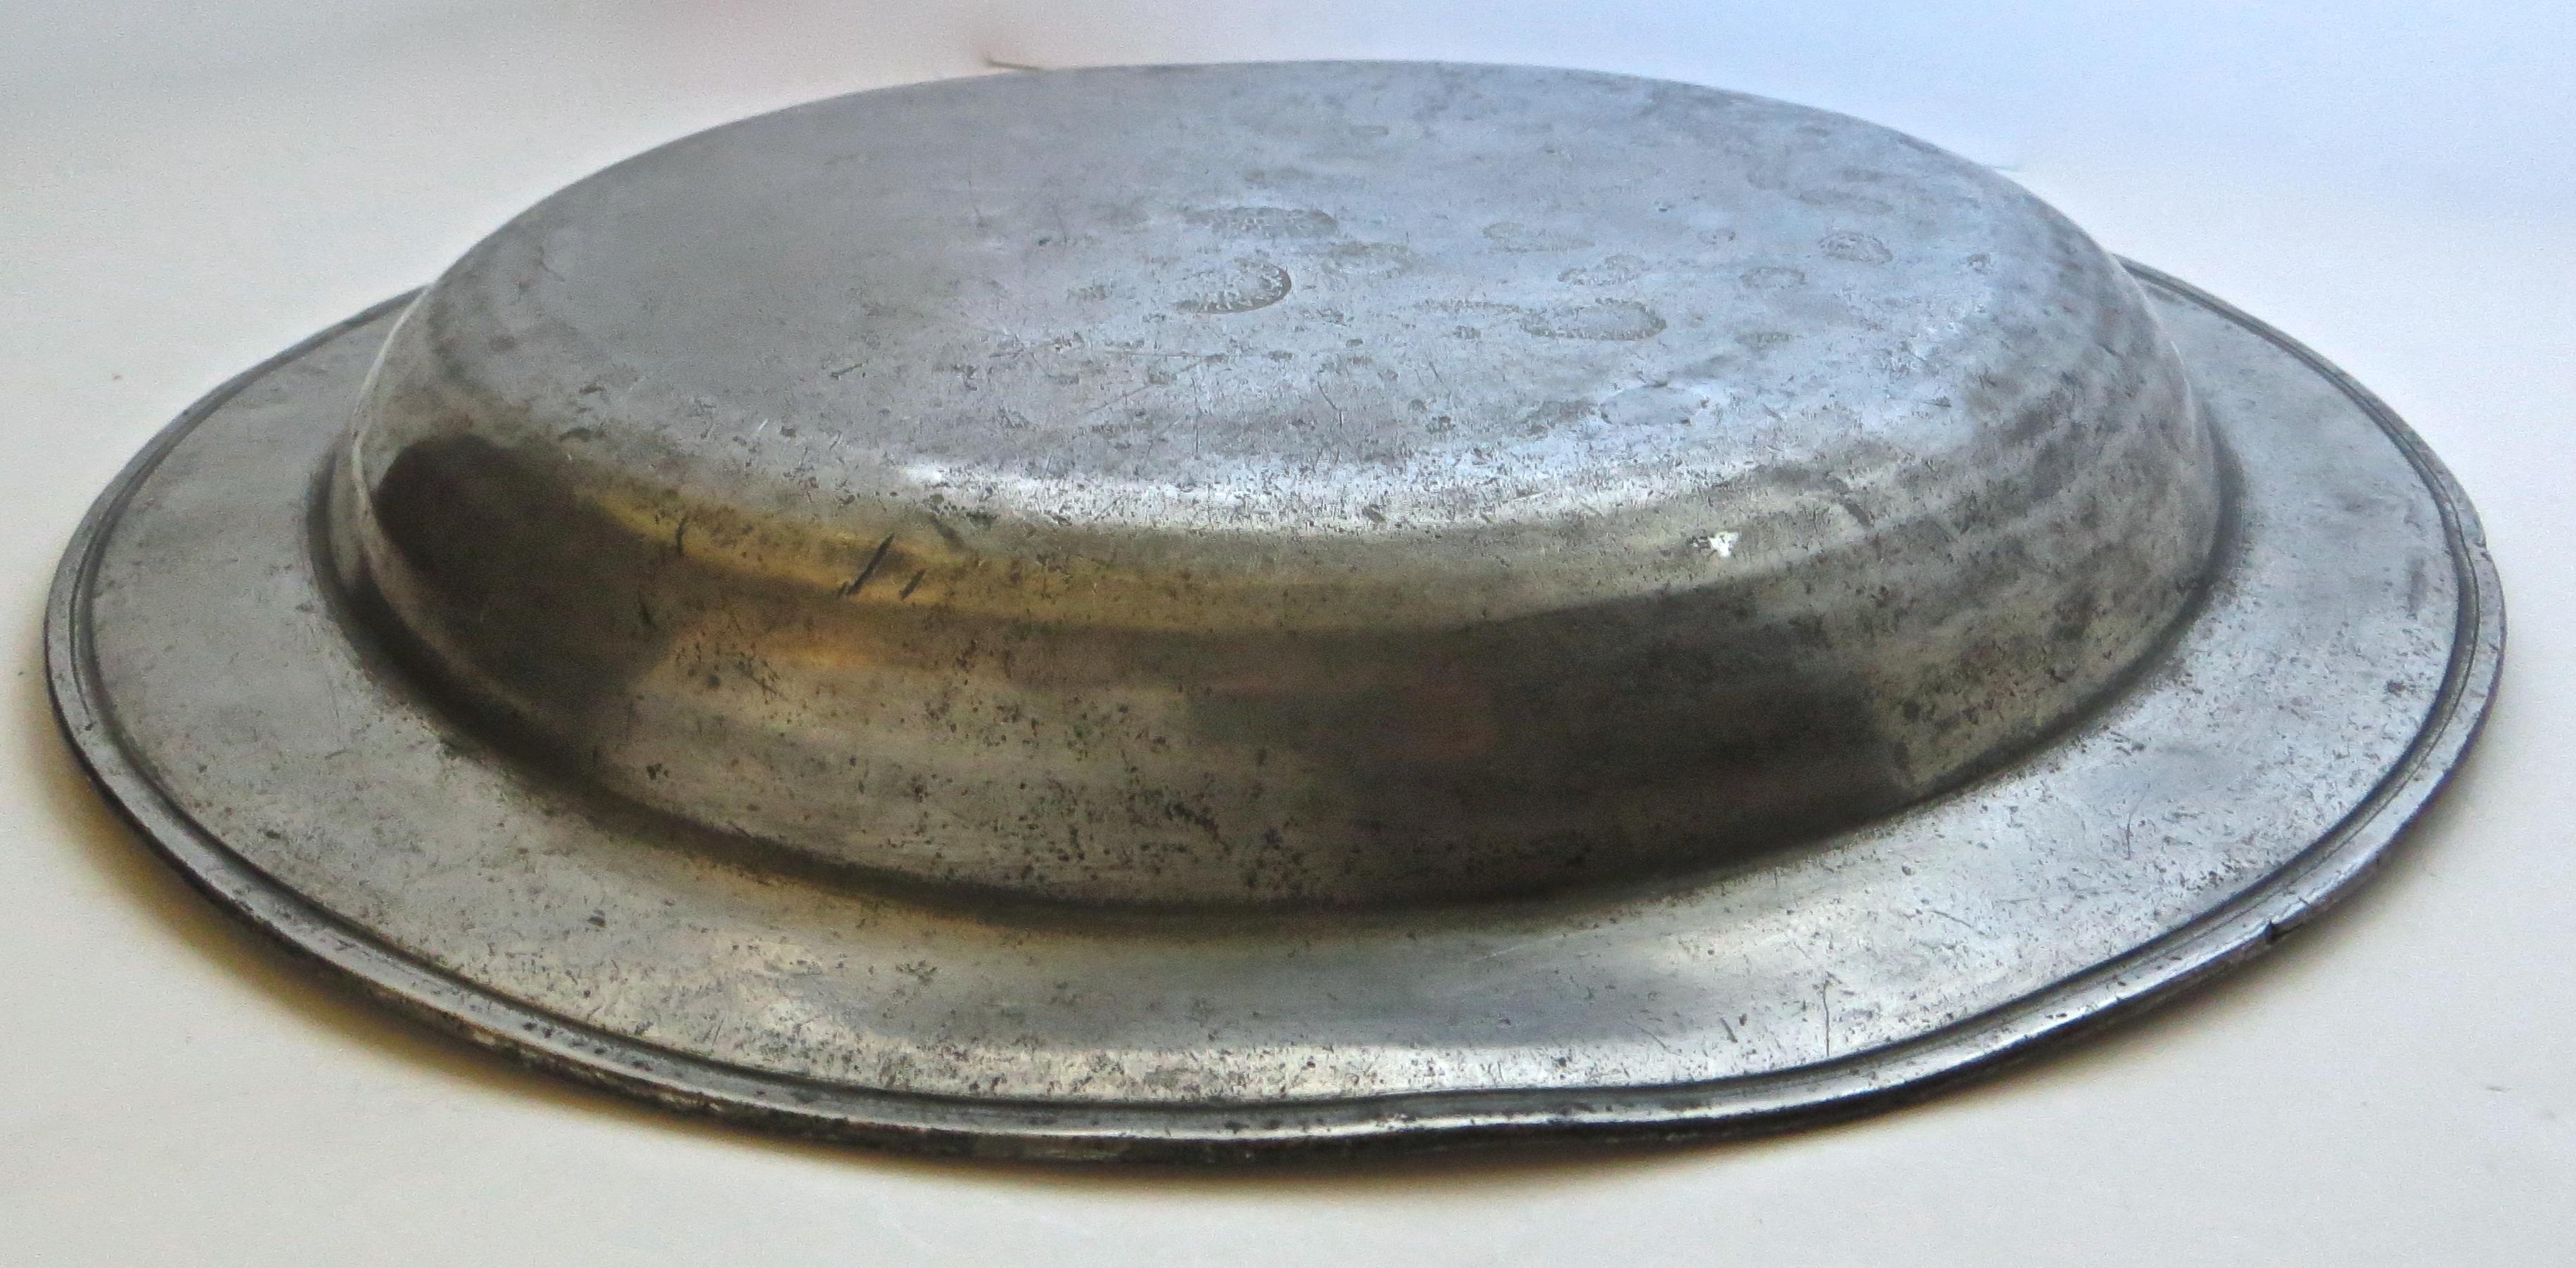 All original early 18th century pewter dish, hallmarked on the rear of the gently rounded bouge; three touchmarks are visible albeit not completely discernible. The most visible states 